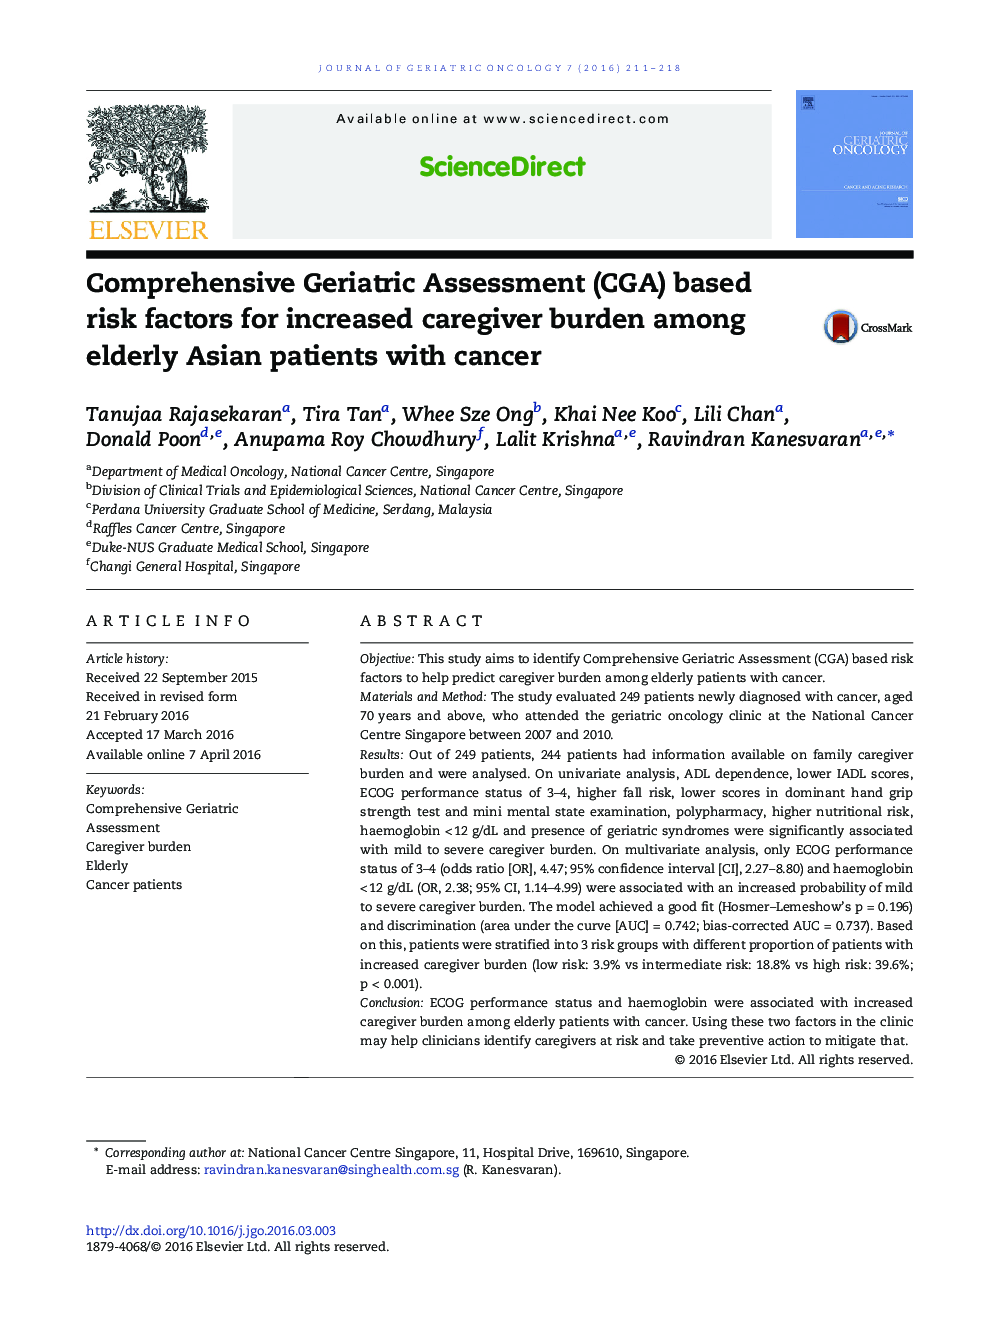 Comprehensive Geriatric Assessment (CGA) based risk factors for increased caregiver burden among elderly Asian patients with cancer